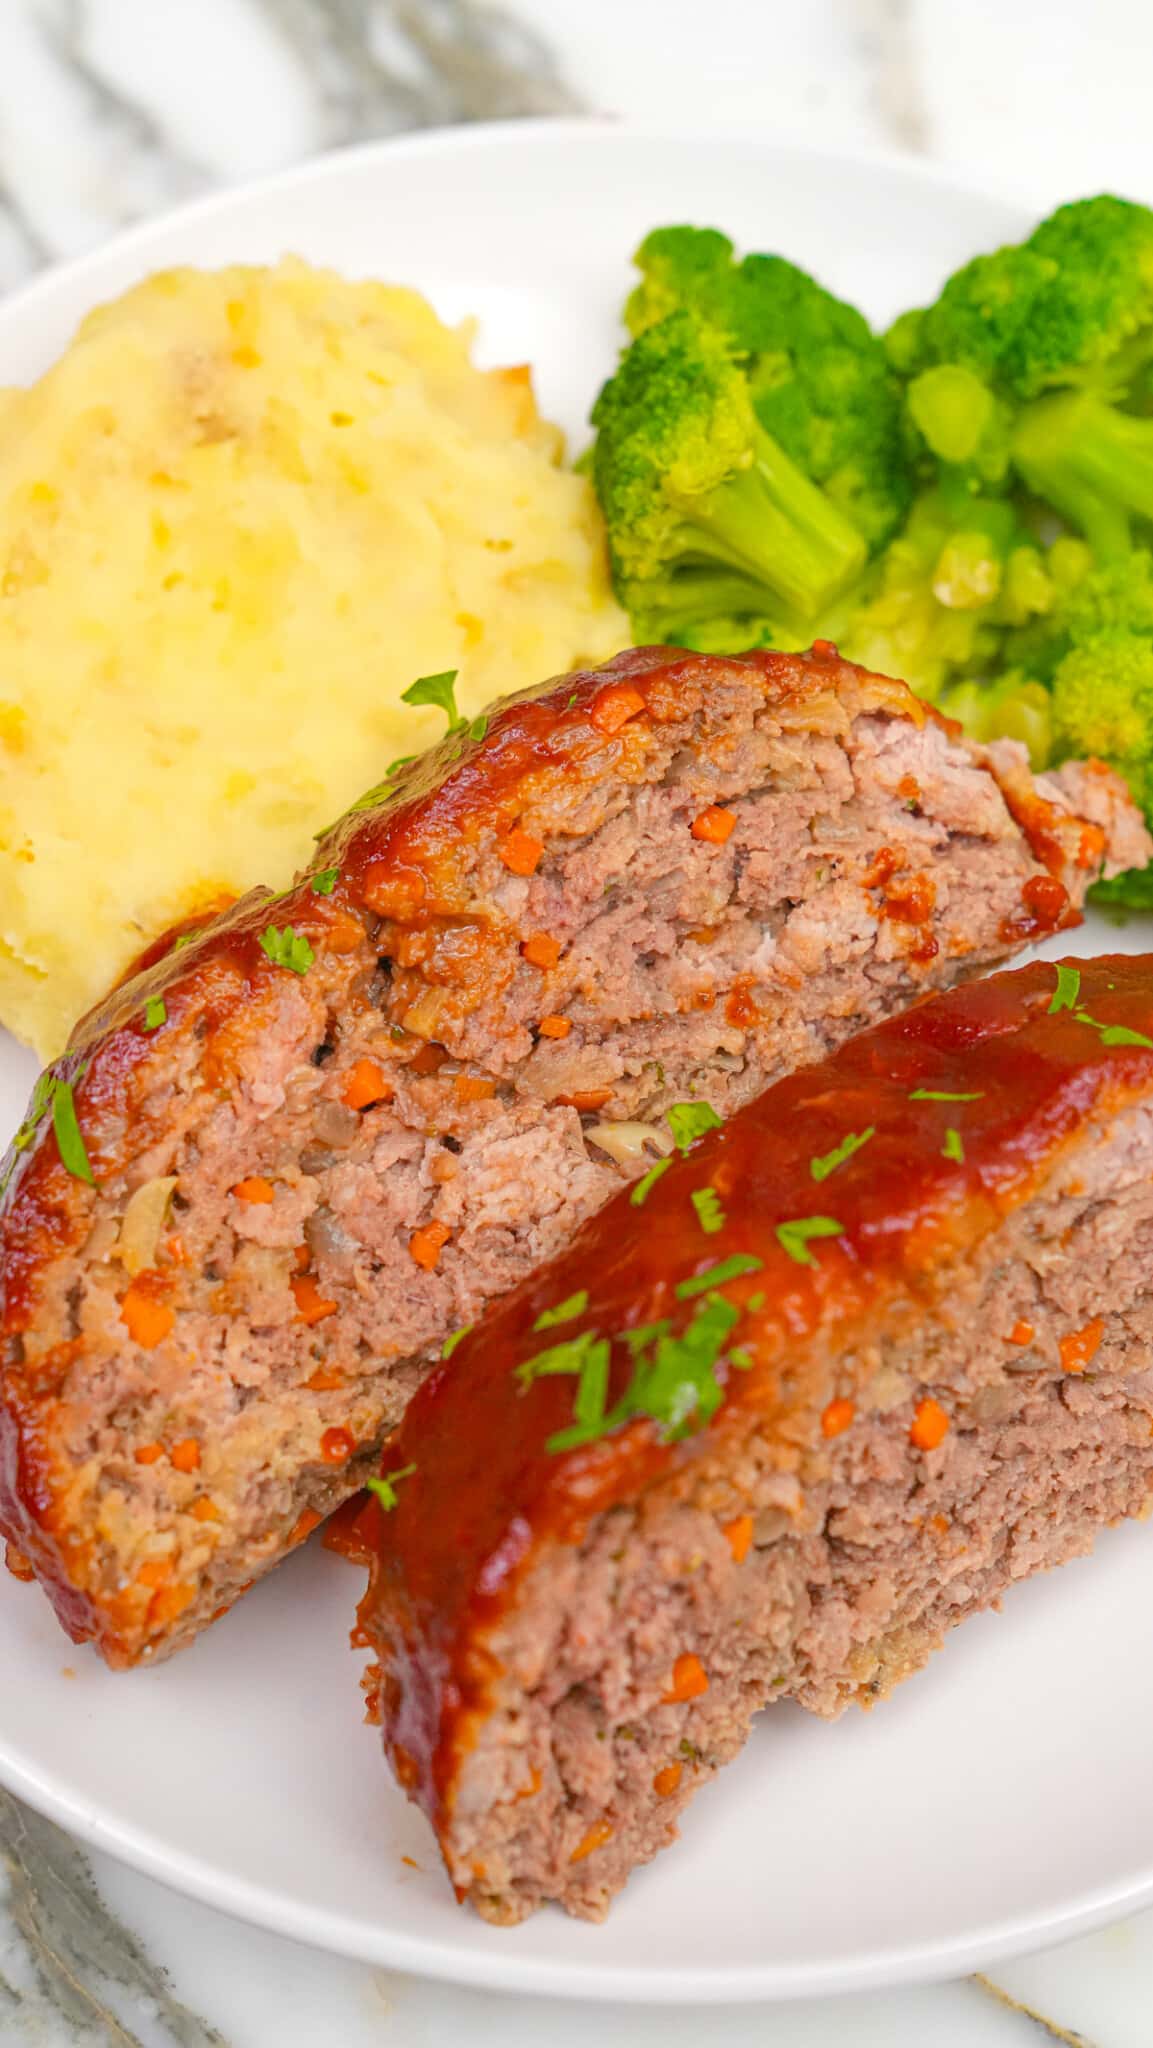 Sliced meatloaf on a plate with broccoli and mashed potatoes.